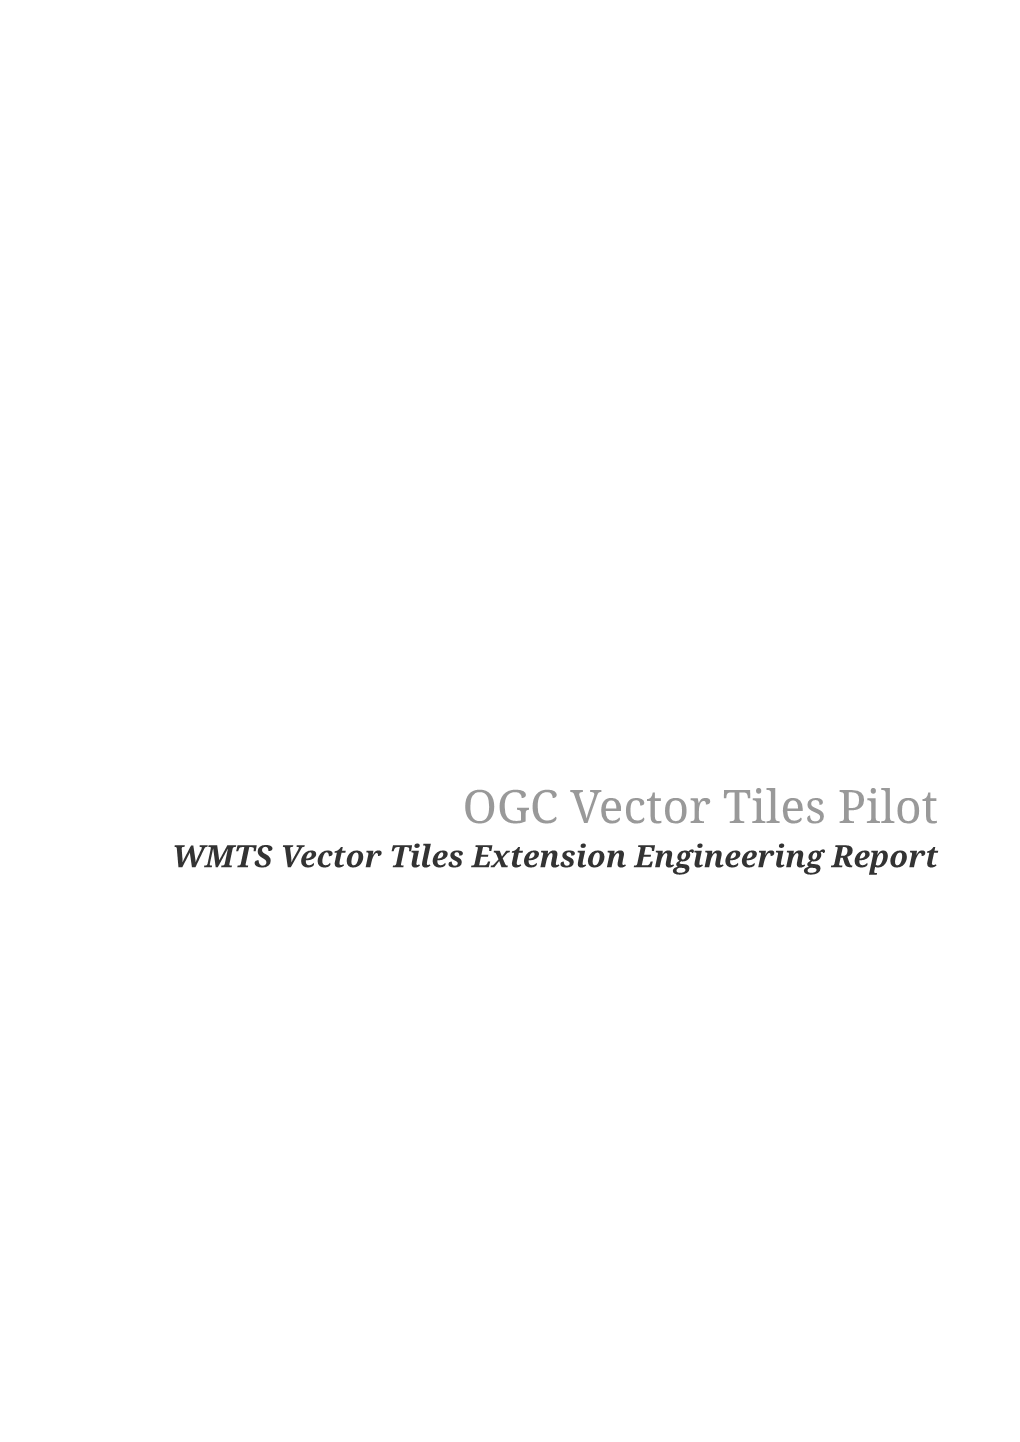 WMTS Vector Tiles Extension Engineering Report Table of Contents